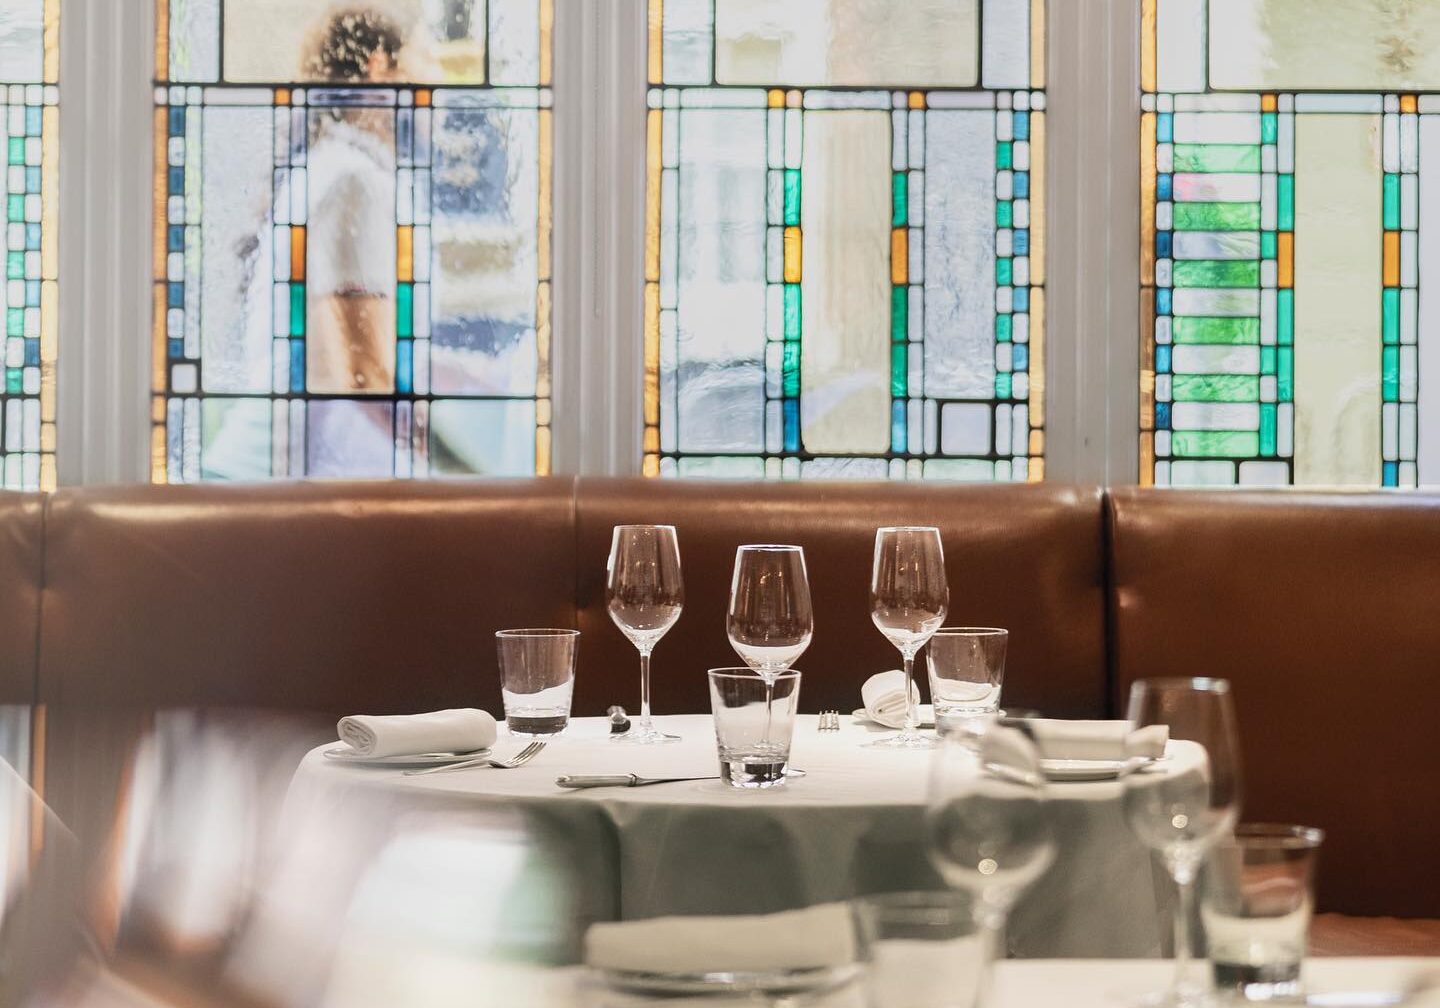 April Guide: 5 London Restaurants to Visit This Month - About Time Magazine